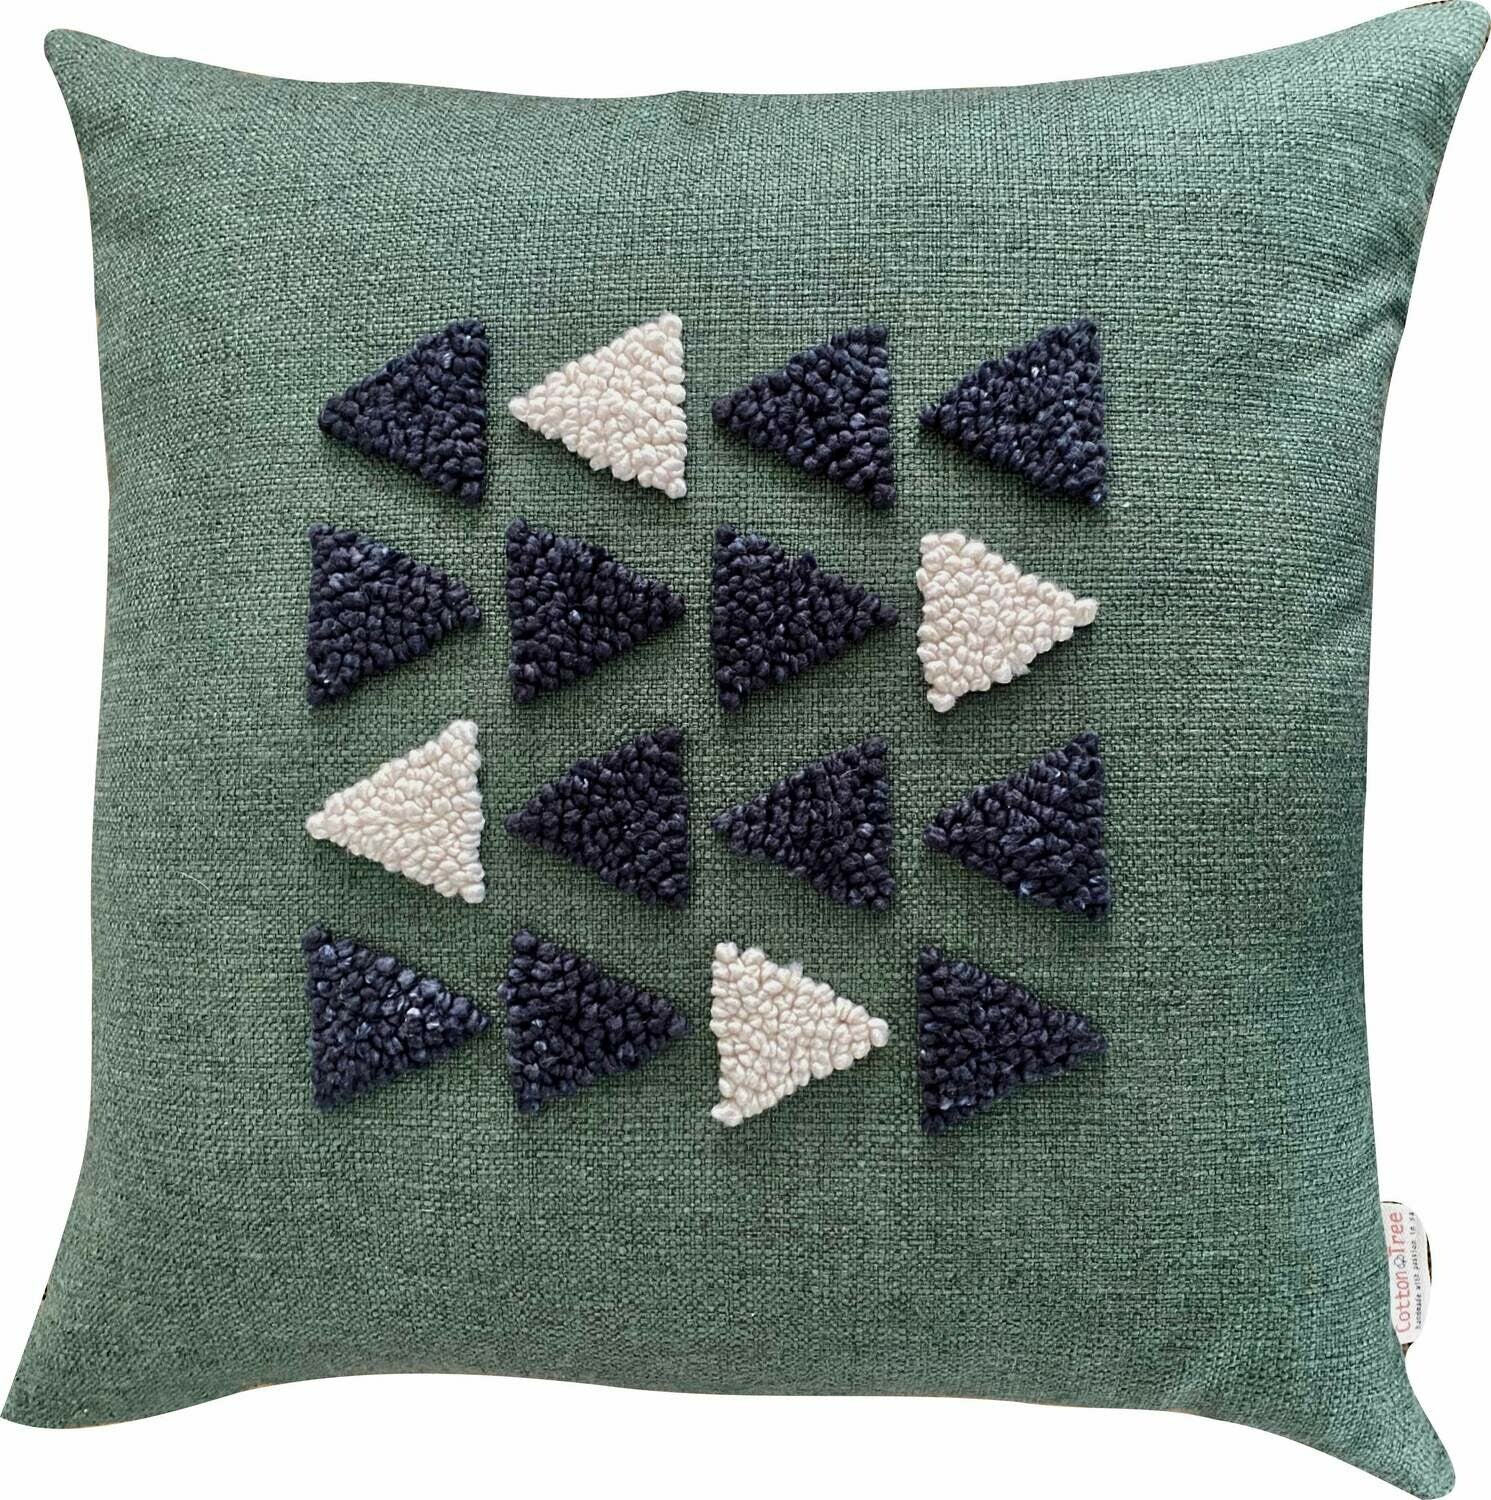 Scatter_Cushion_Punchneedle_Appilque_Scandi_African_Charcoal_natural__Green